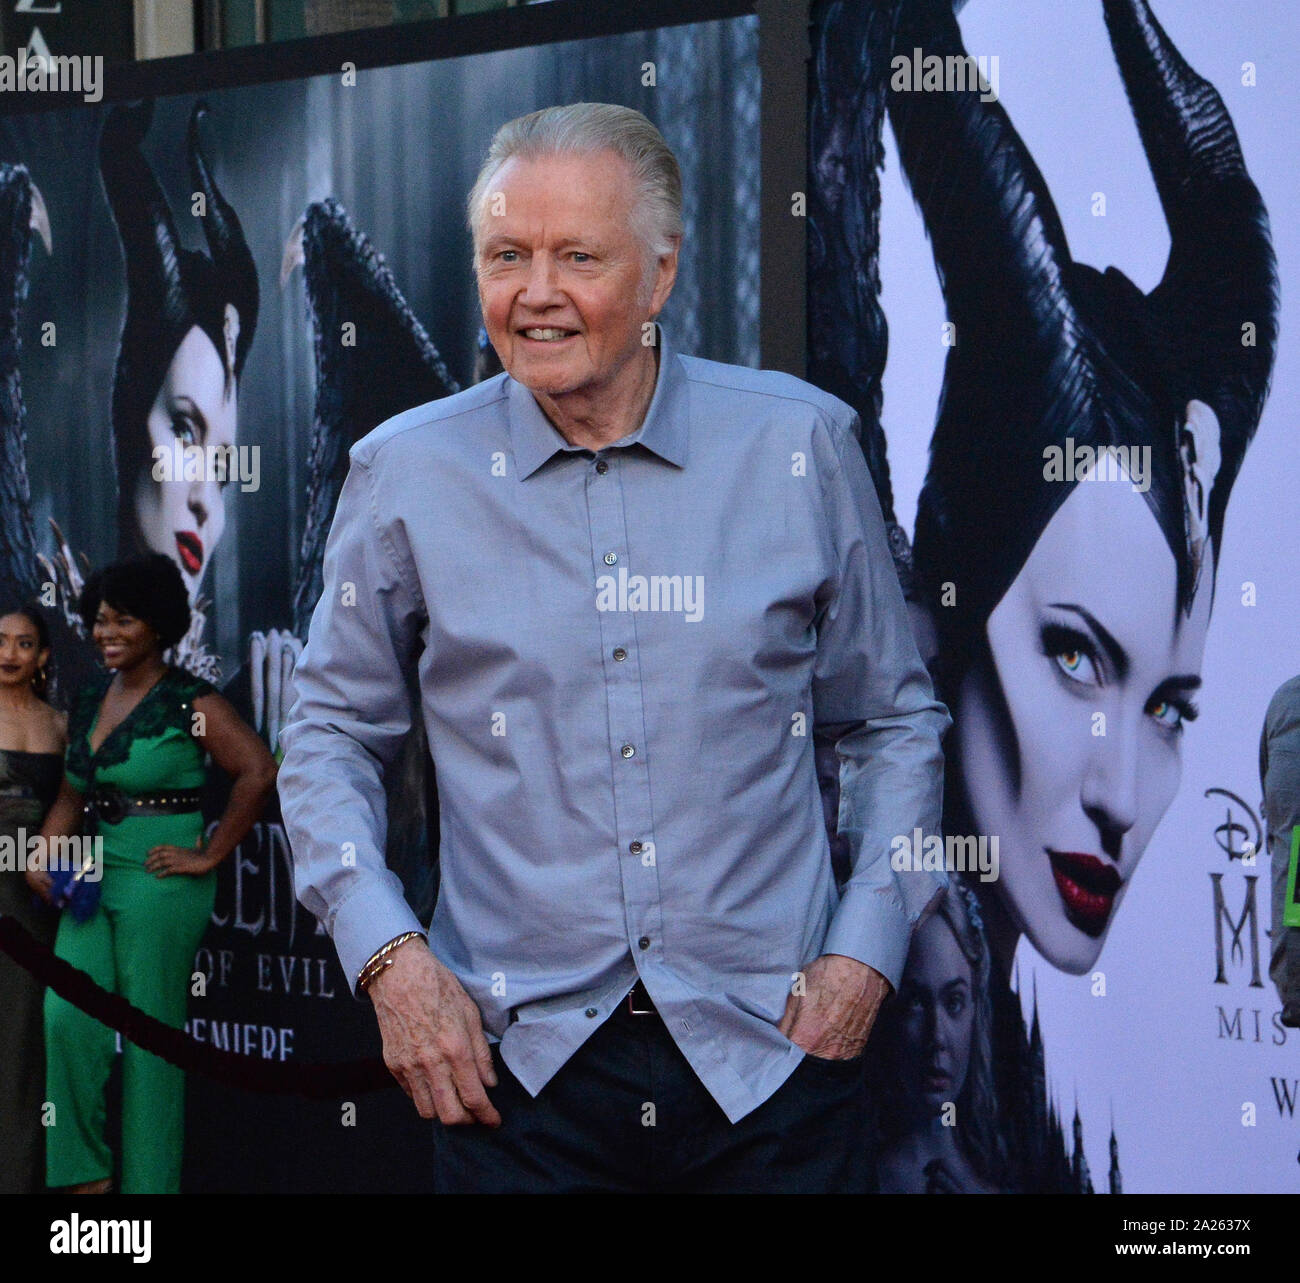 Los Angeles, United States. 30th Sept, 2019. Actor Jon Voight, father of cast member Angelina Jolie, pictured on the movie poster at rear, attends the premiere of the motion picture fantasy 'Maleficent: Mistress of Evil' at the El Capitan Theatre in the Hollywood section of Los Angeles on Monday, September 30, 2019. Storyline: Maleficent and her goddaughter Aurora begin to question the complex family ties that bind them as they are pulled in different directions by impending nuptials, unexpected allies, and dark new forces at play. Photo by Jim Ruymen/UPI Credit: UPI/Alamy Live News Stock Photo